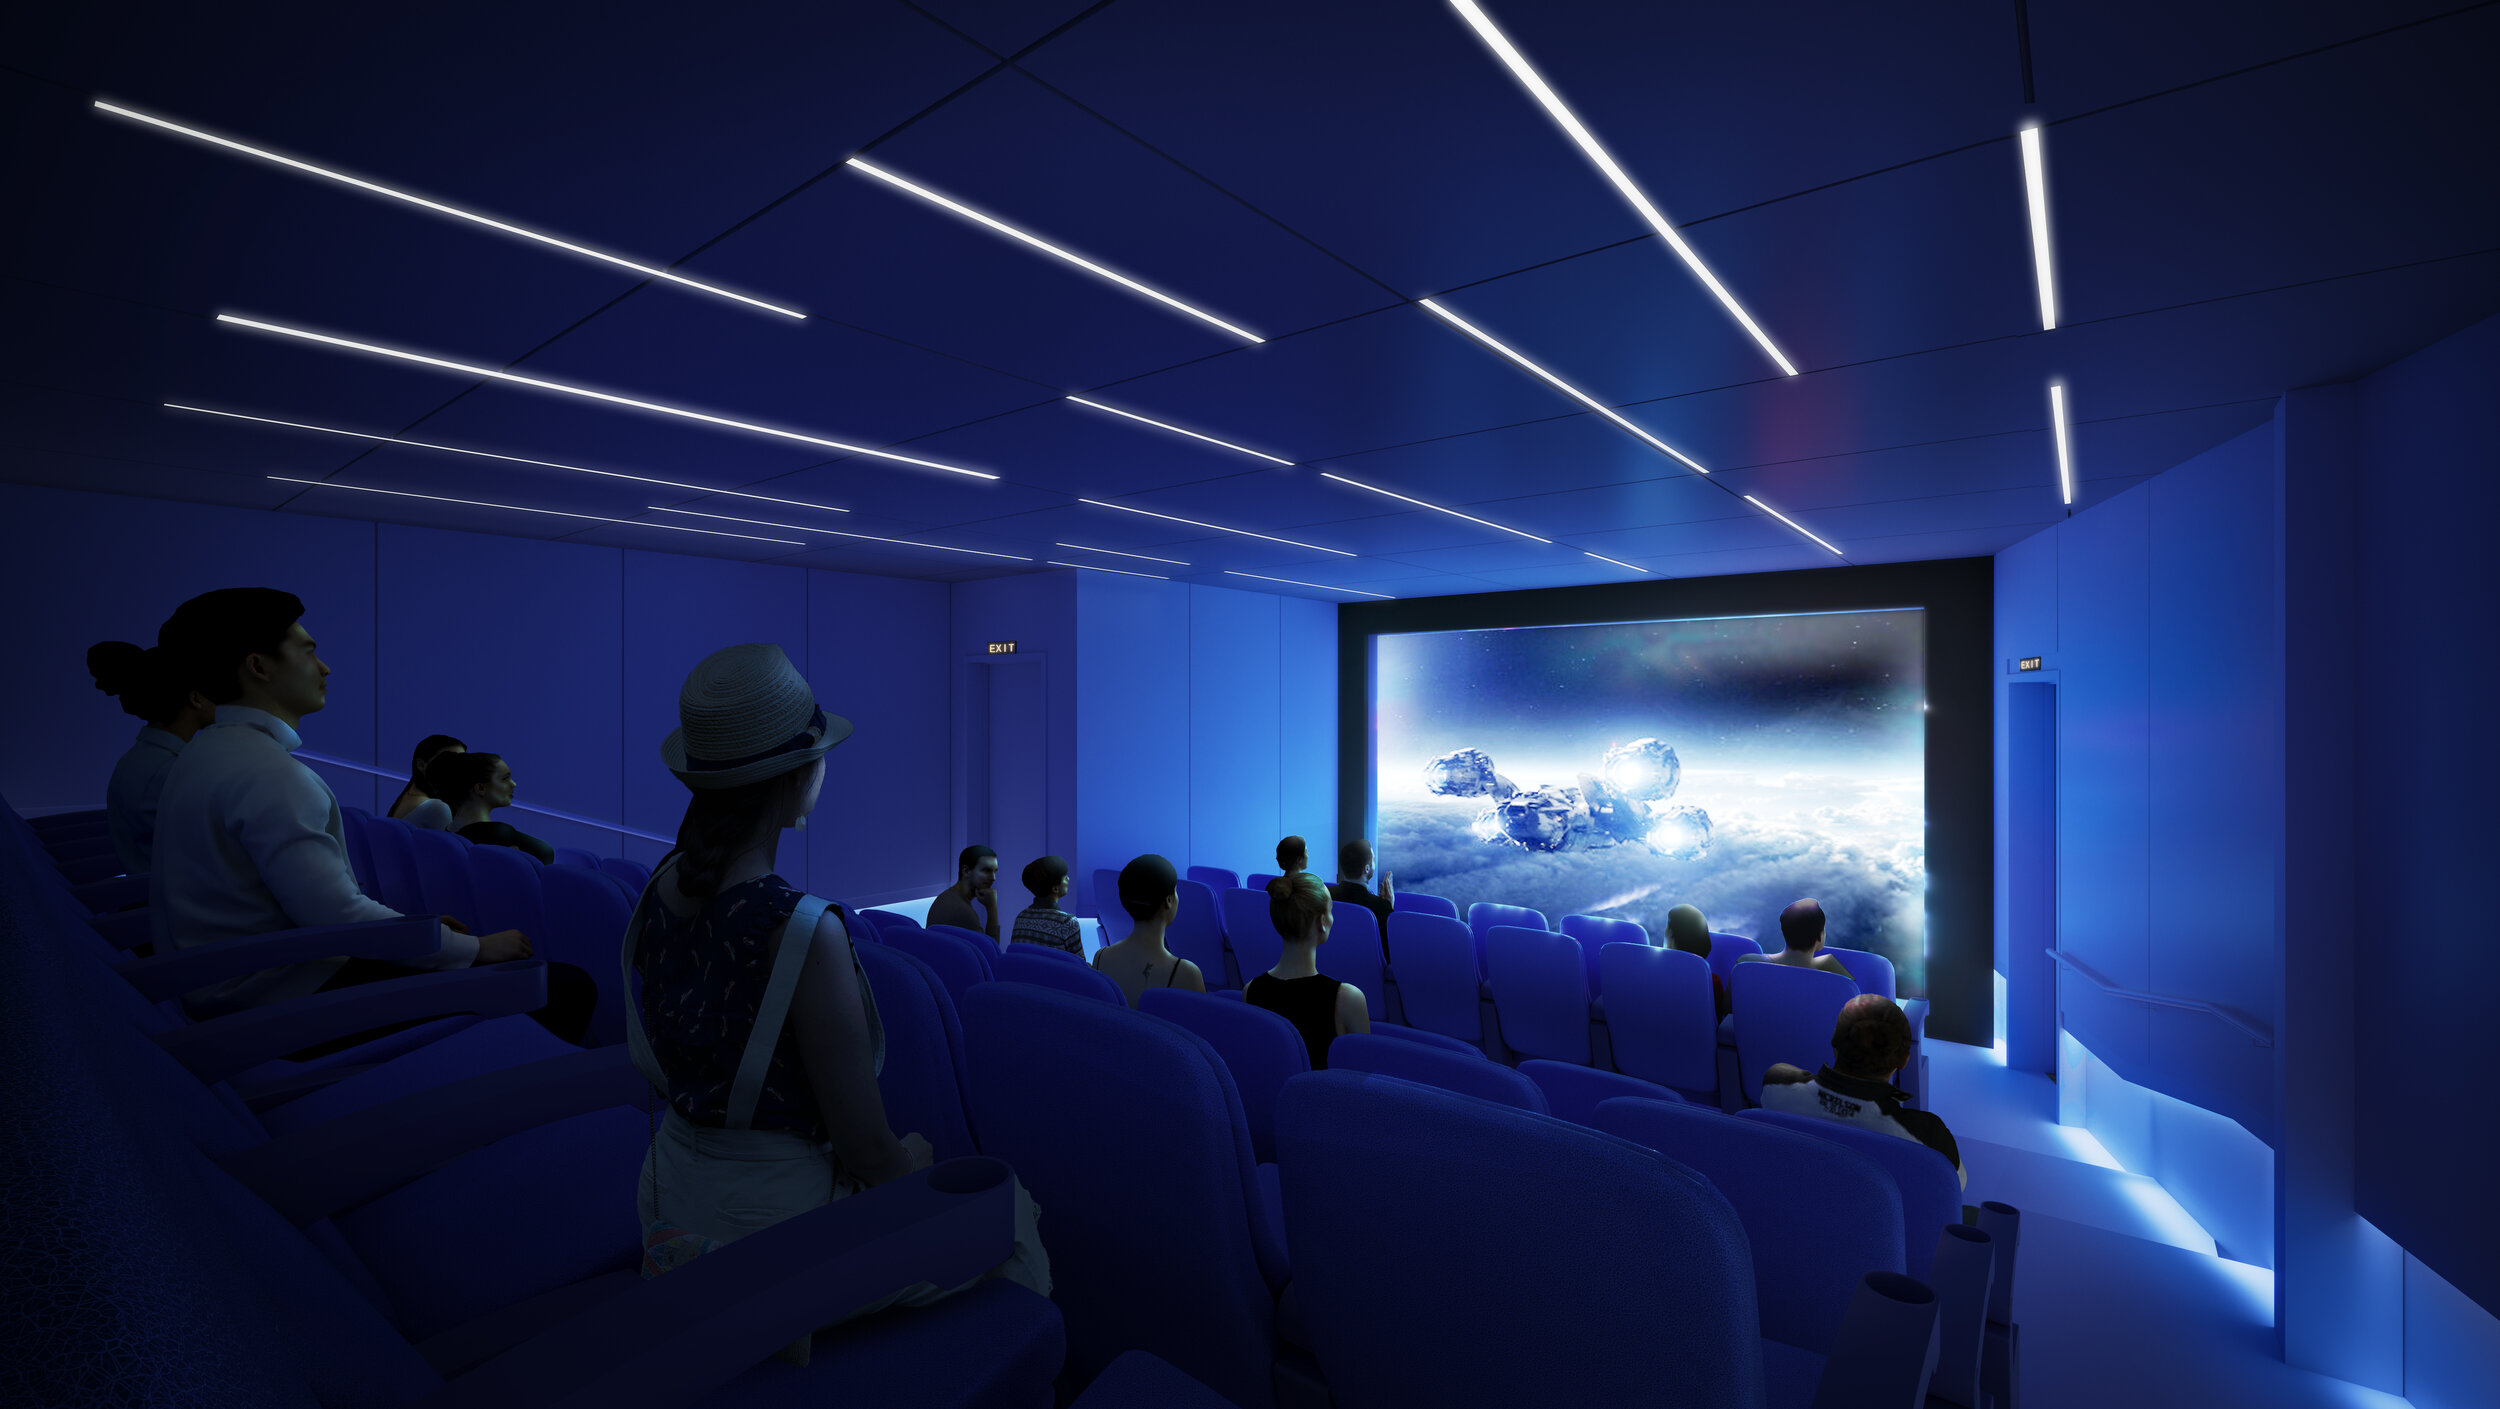 Moviehouse 6, a new, state-of-the-art 57-seat cinema for first-run films and special events